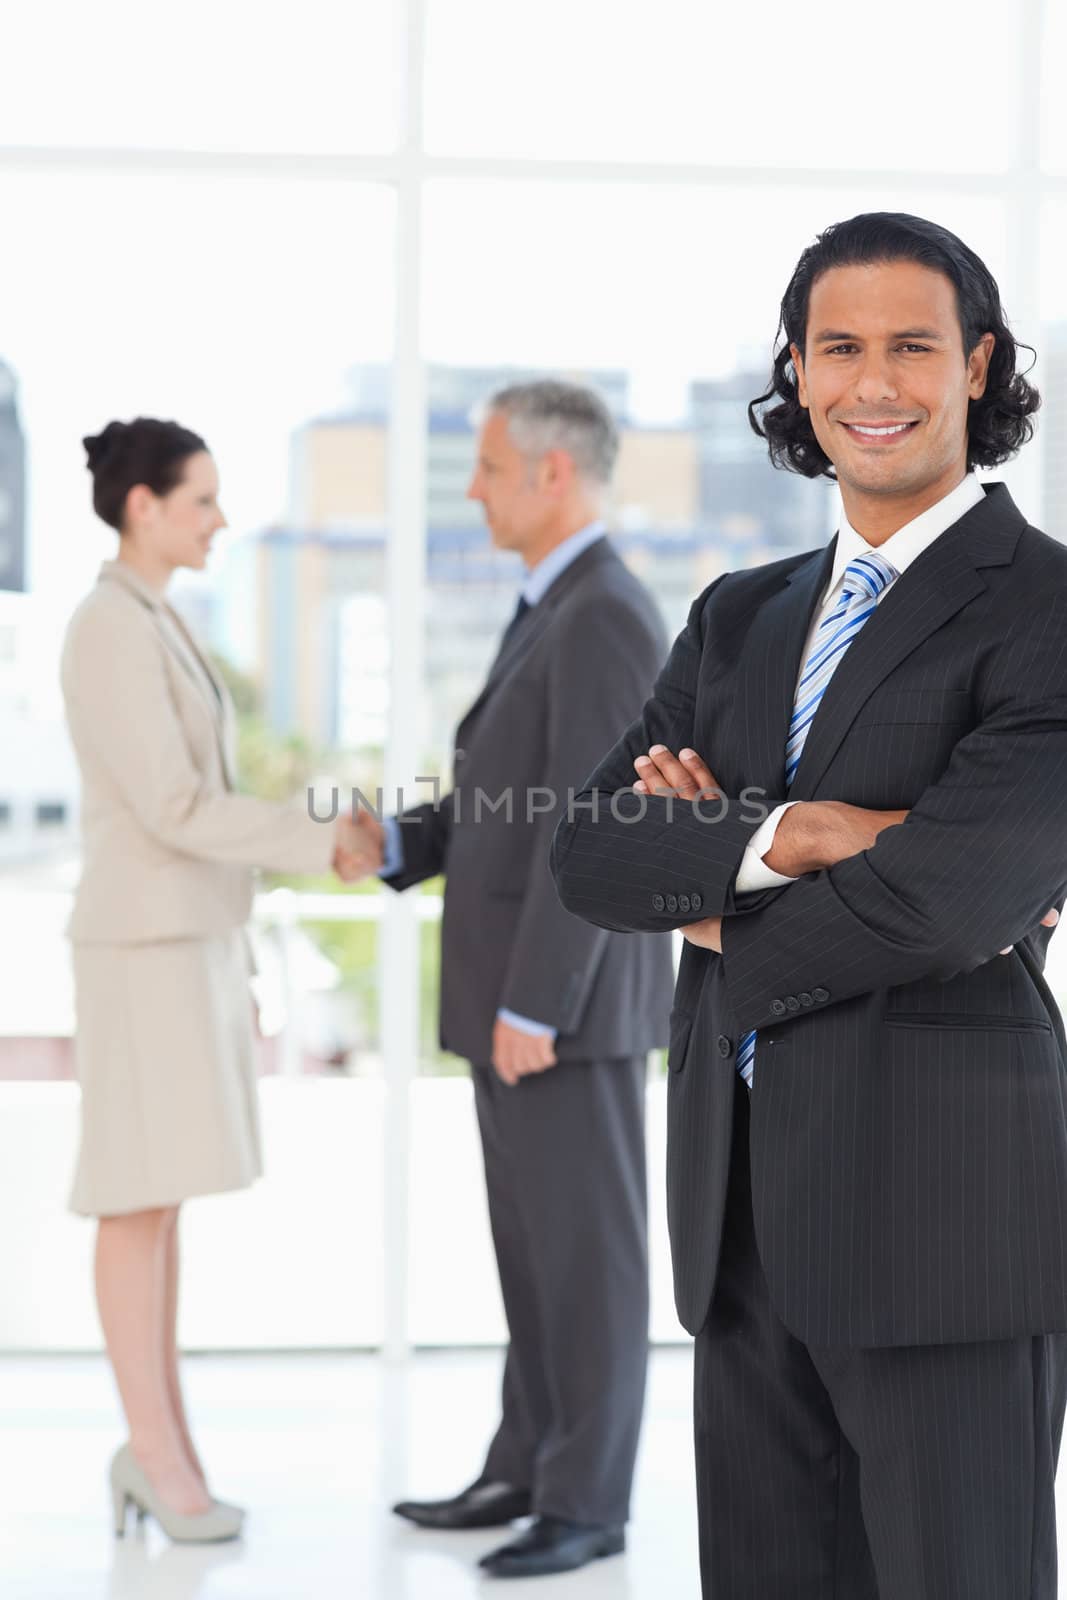 Young executive standing upright in front of business people shaking hands